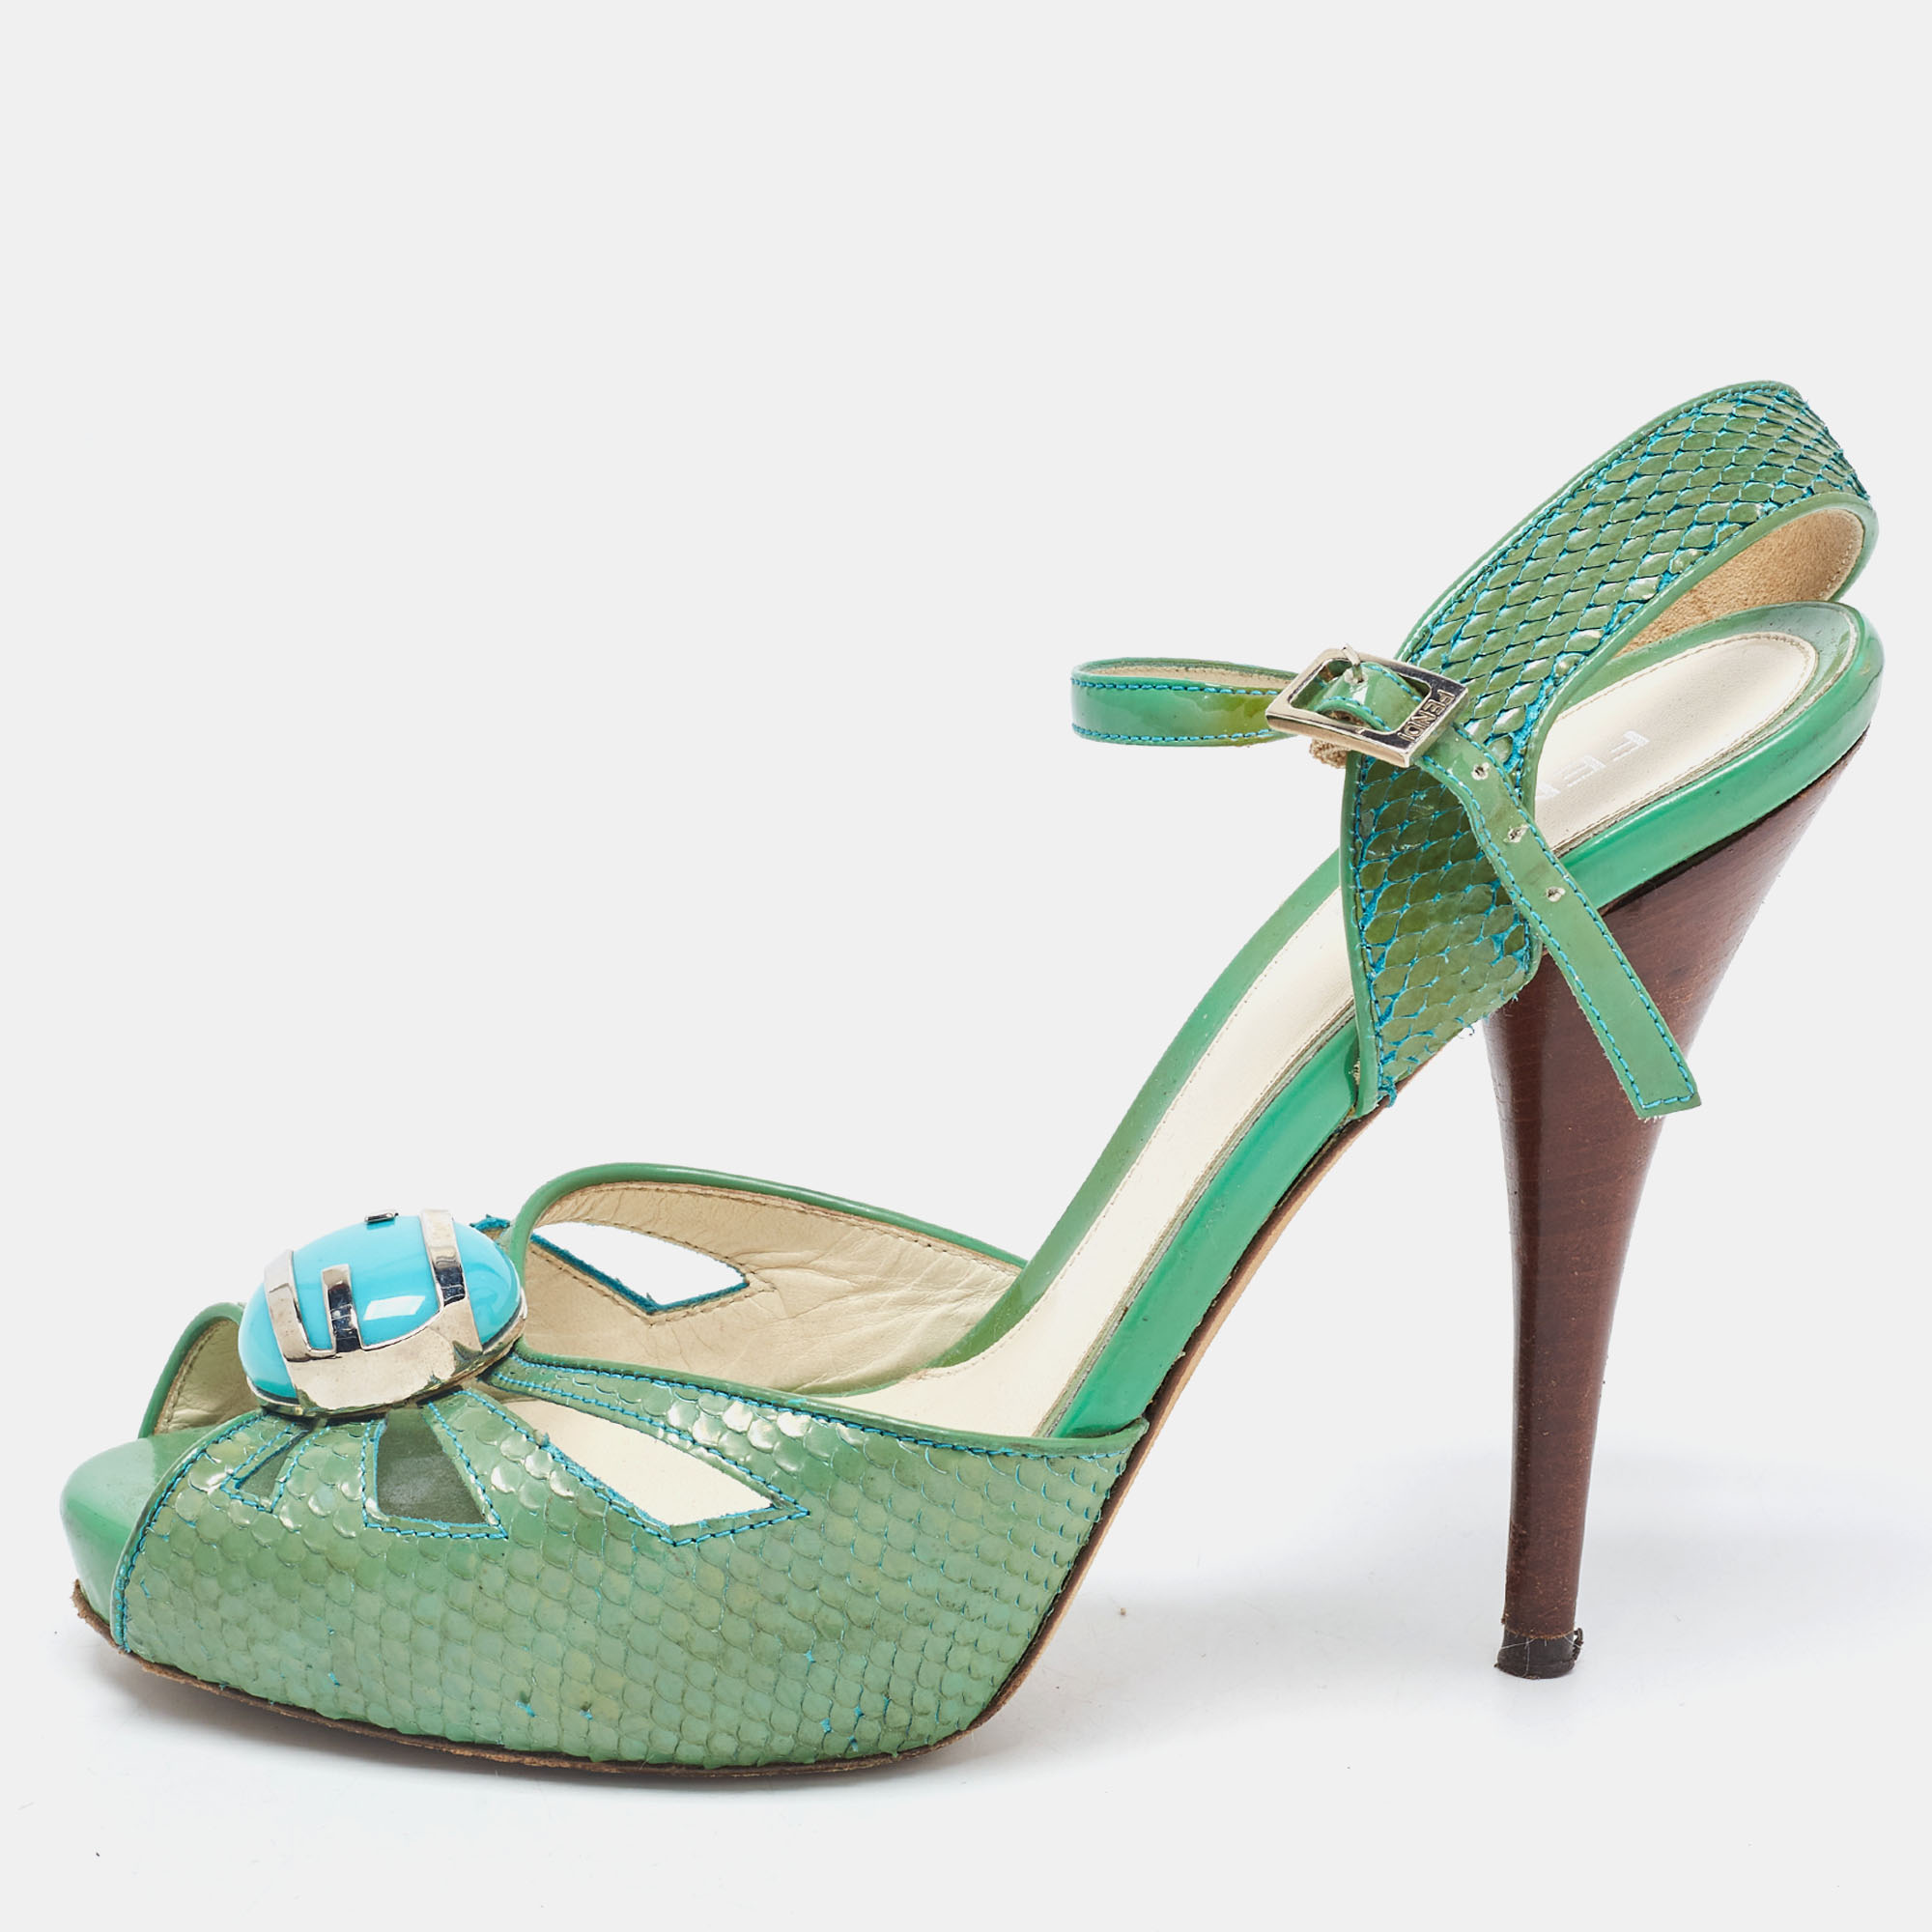 Pre-owned Fendi Green Python Embossed Leather Slingback Sandals Size 39